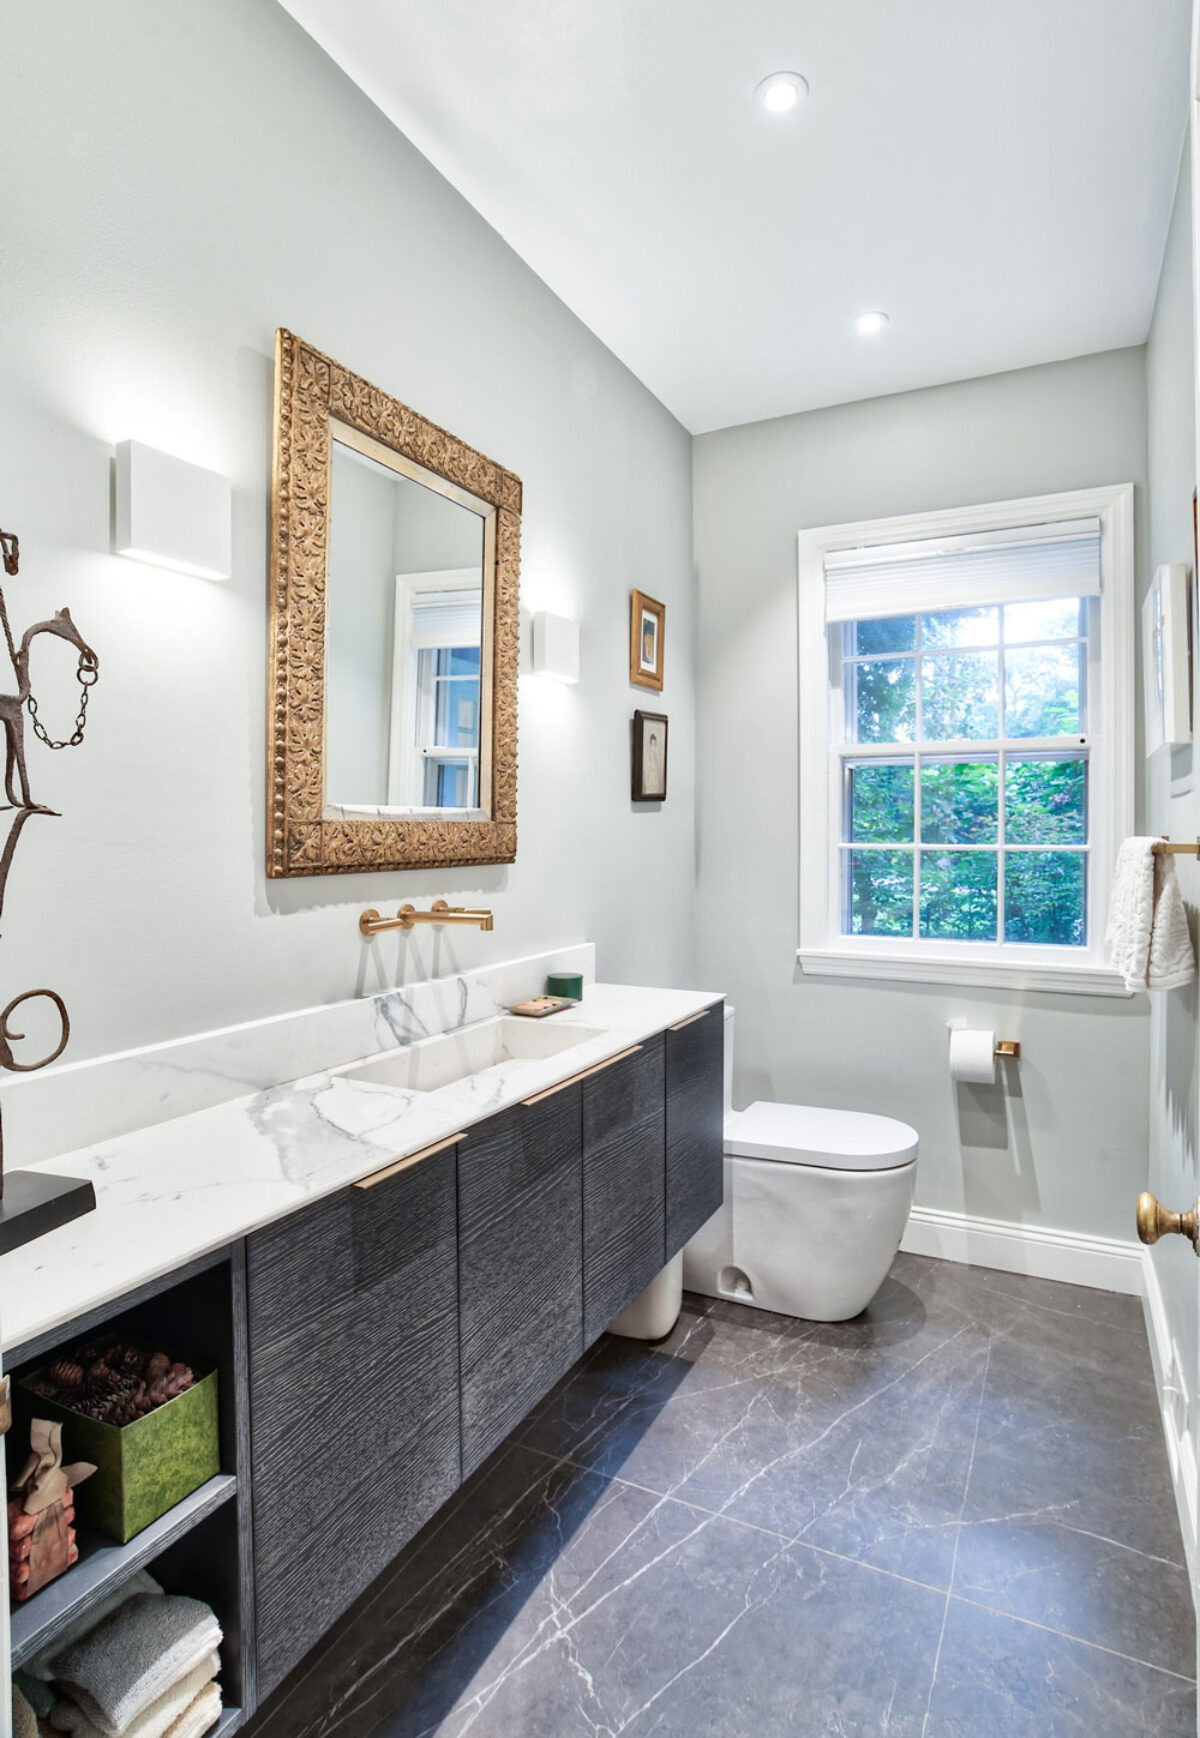 How Much Does Bathroom Renovation Cost, Bathroom Remodel Costs 2021